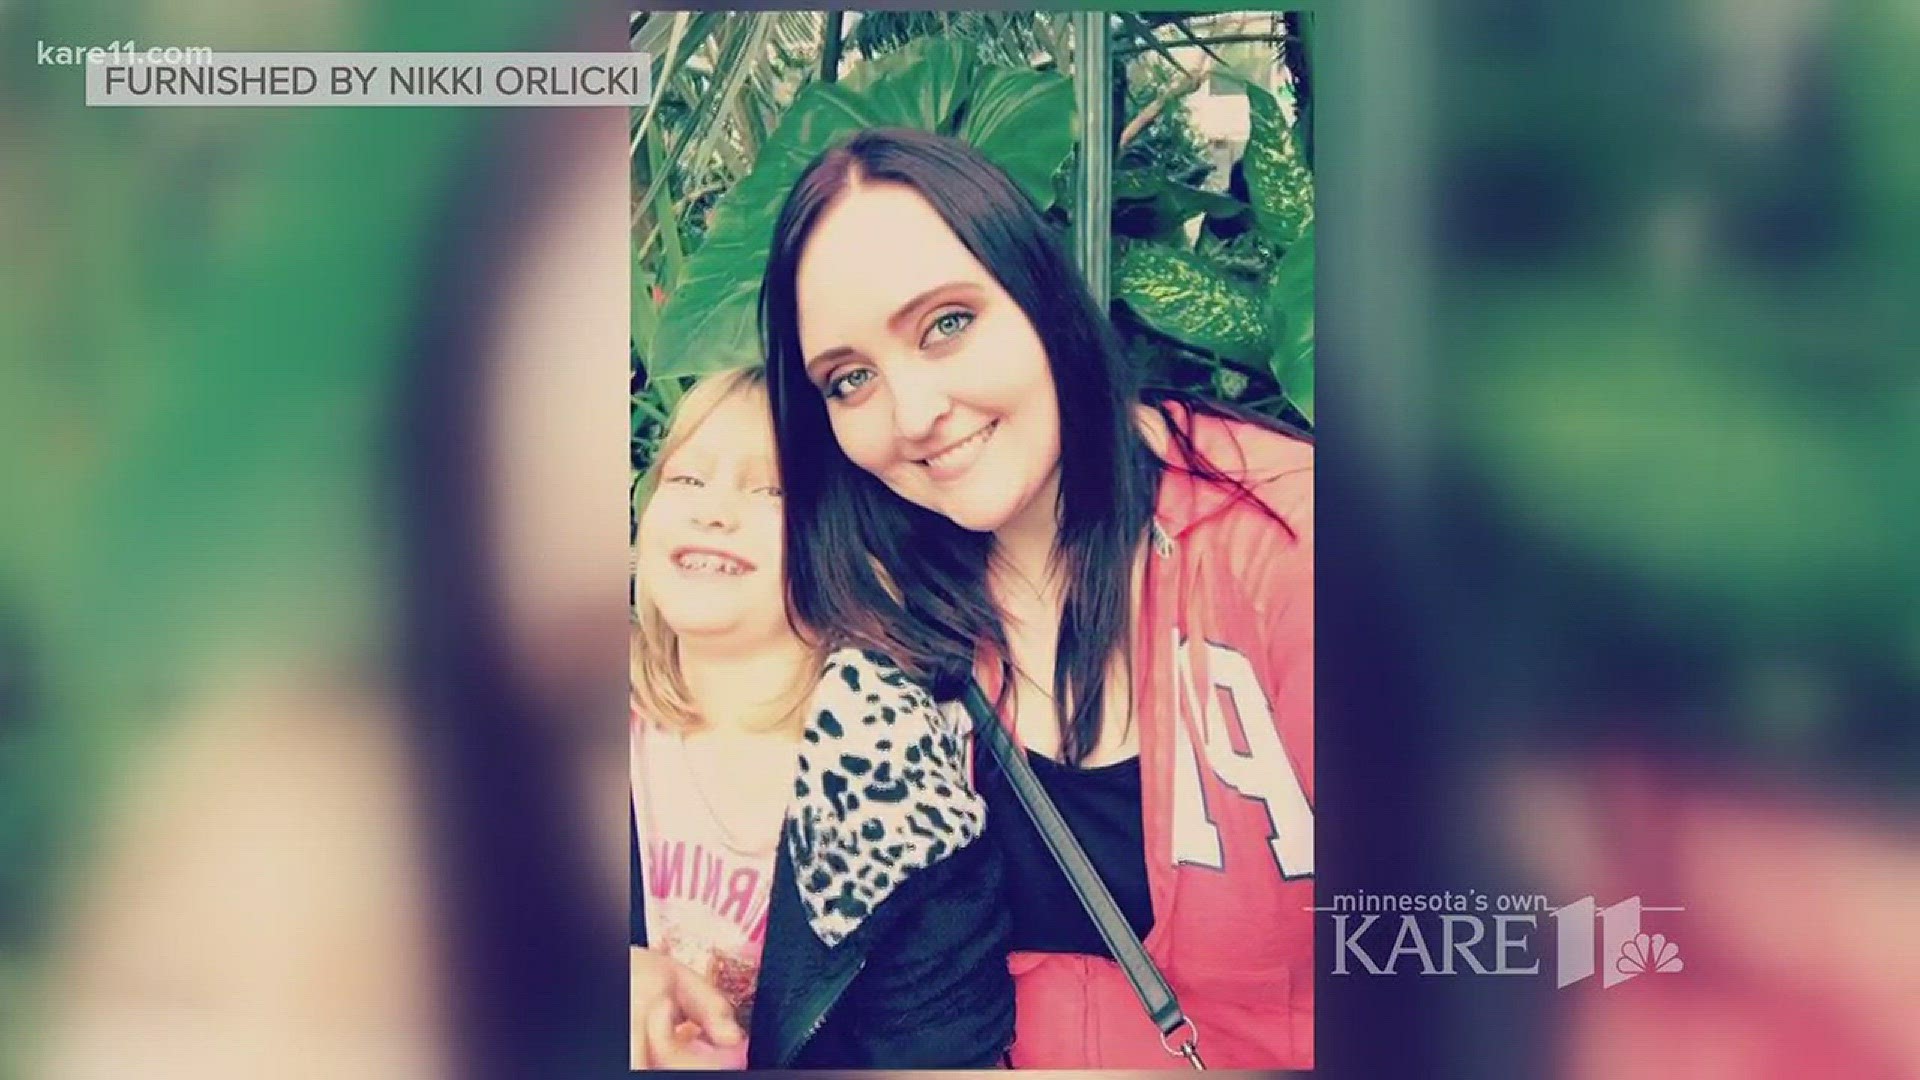 A Minneapolis 911 dispatcher on her way to work was killed on a Brooklyn Park highway in a crash with a suspected drunken driver going the wrong way, according to authorities. http://kare11.tv/2EzC2ok